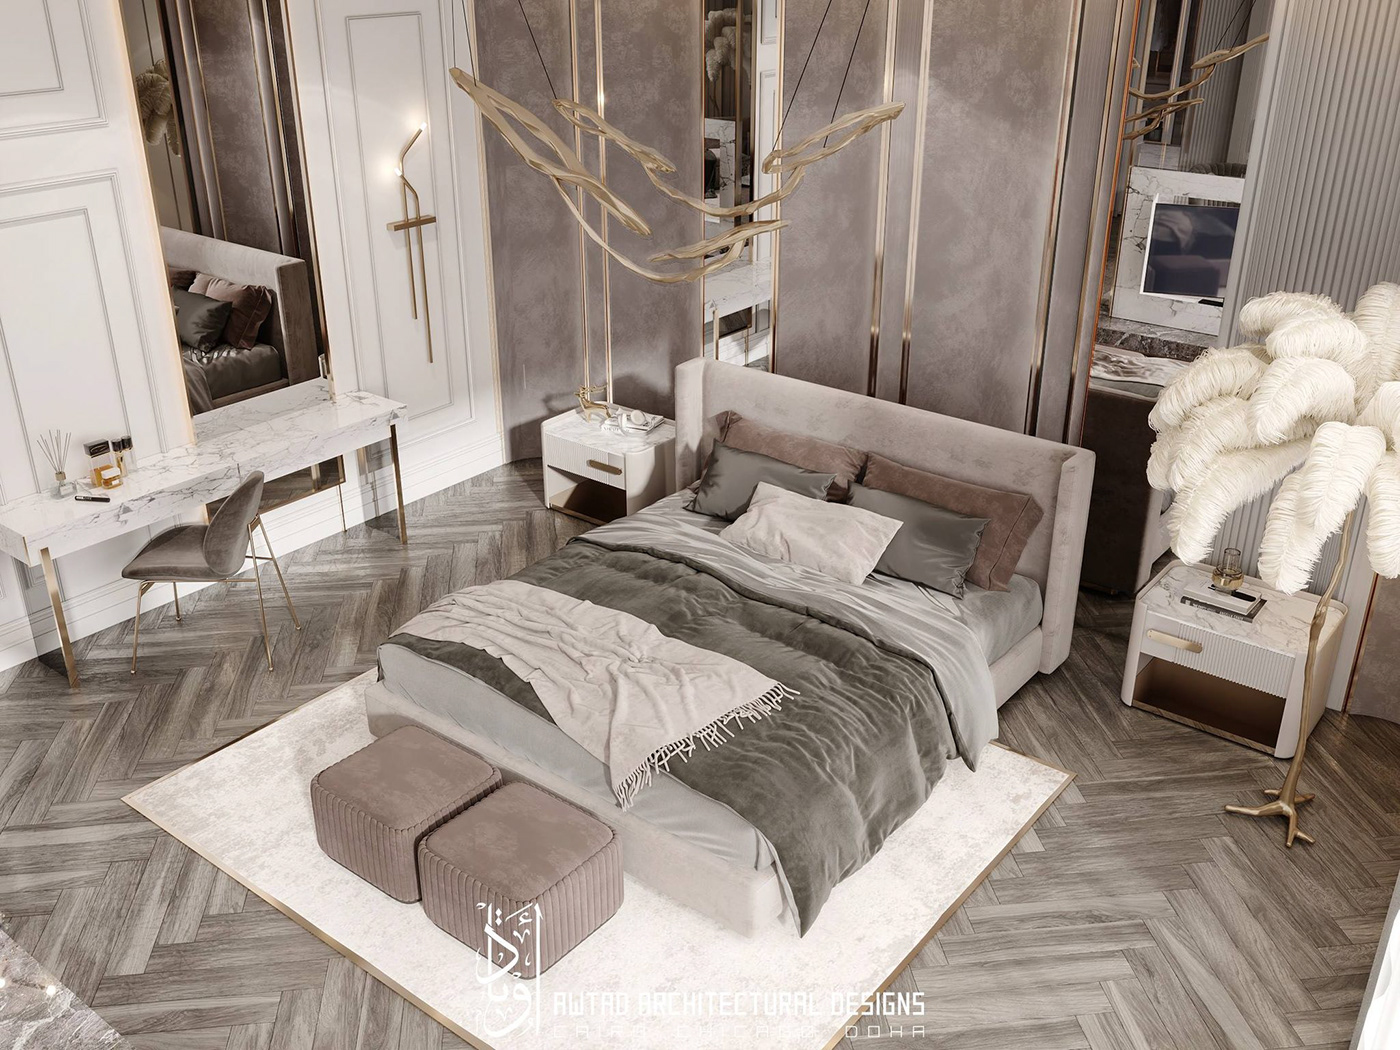 3dmax architecture Bedrooms corona Interior Master NUDESPALETTE contemporary luxurious neoclassic bed design fabric feather light Masterbedroom  modern